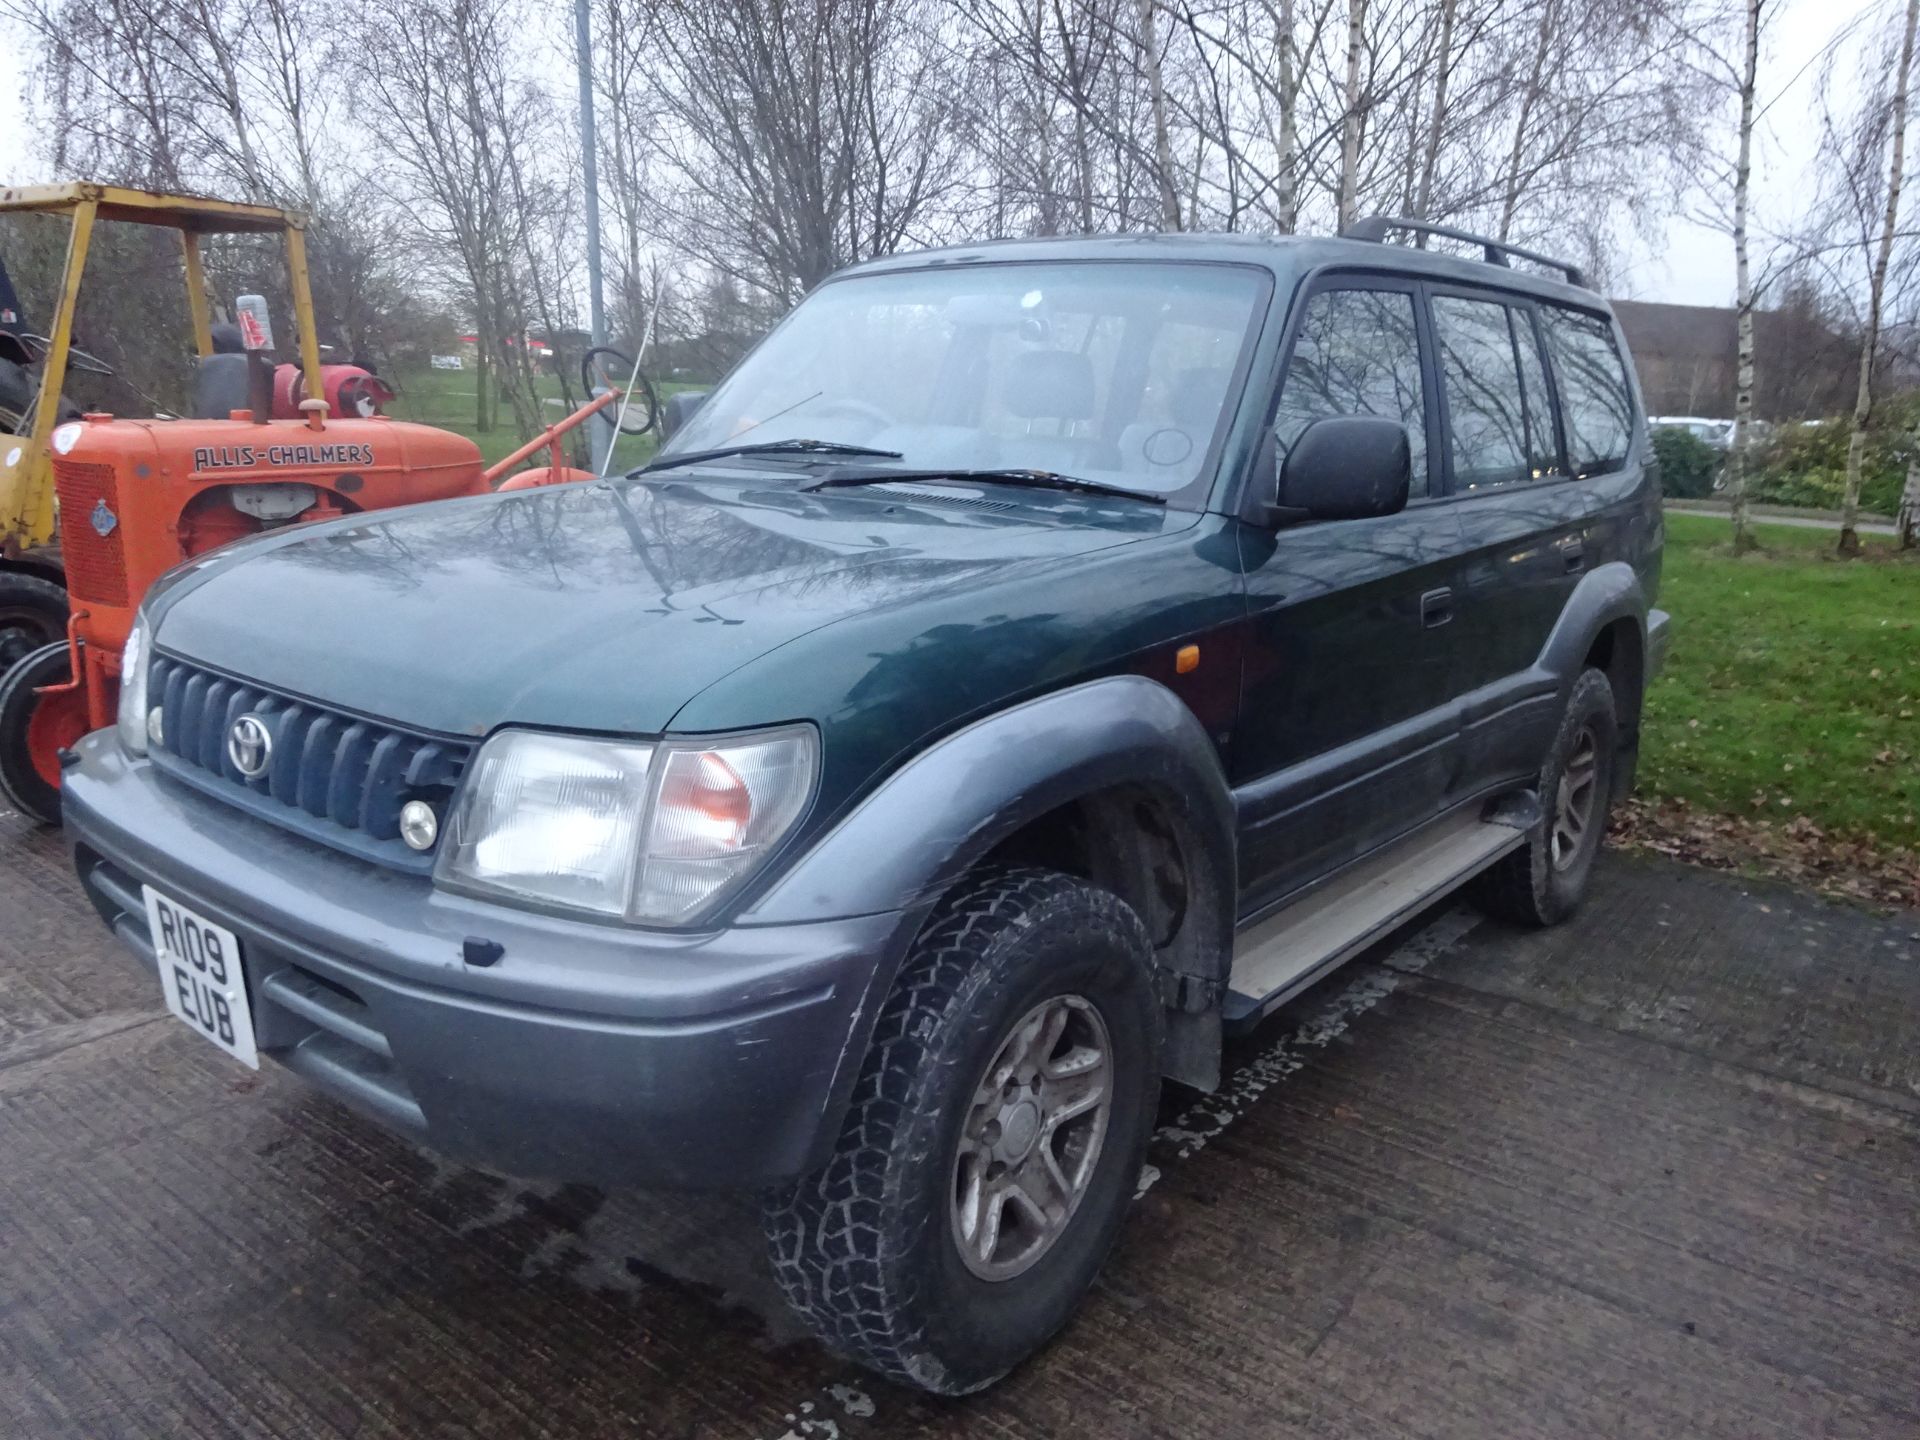 TOYOTA LAND CRUISER 32 YEARS OLD MOT JUNE 2021 - OFF ROAD AND ROAD TYRES - REGISTRATION R109 EUB - Image 2 of 3